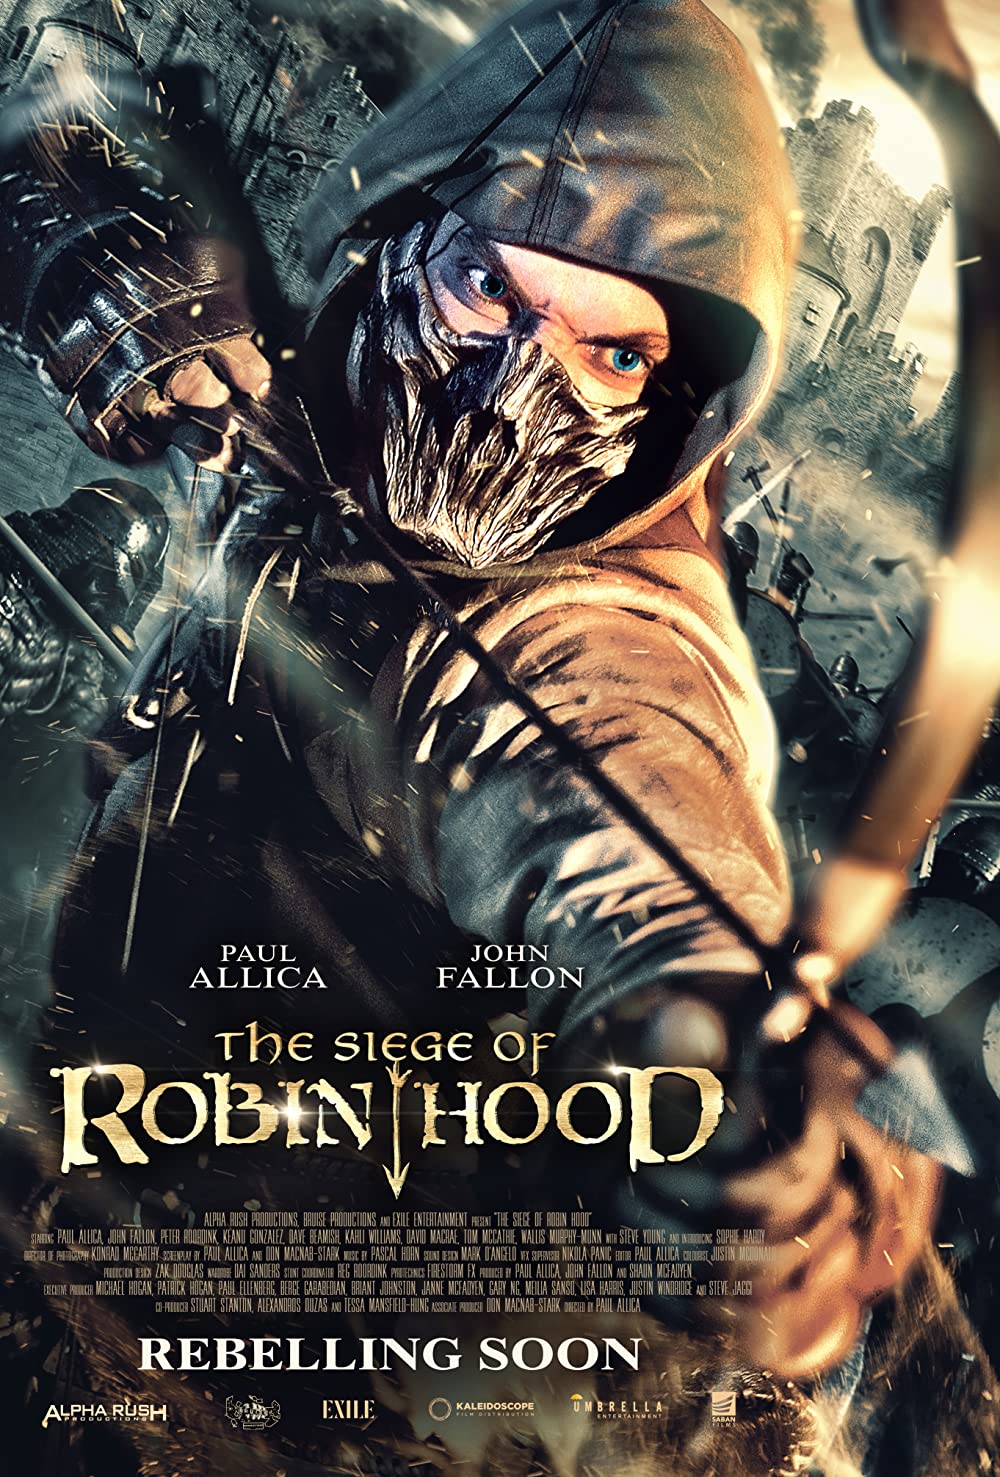 The Siege of Robin Hood 2022 Dual Audio Hindi (VoiceOver) 350MB HDRip 480p Free Download